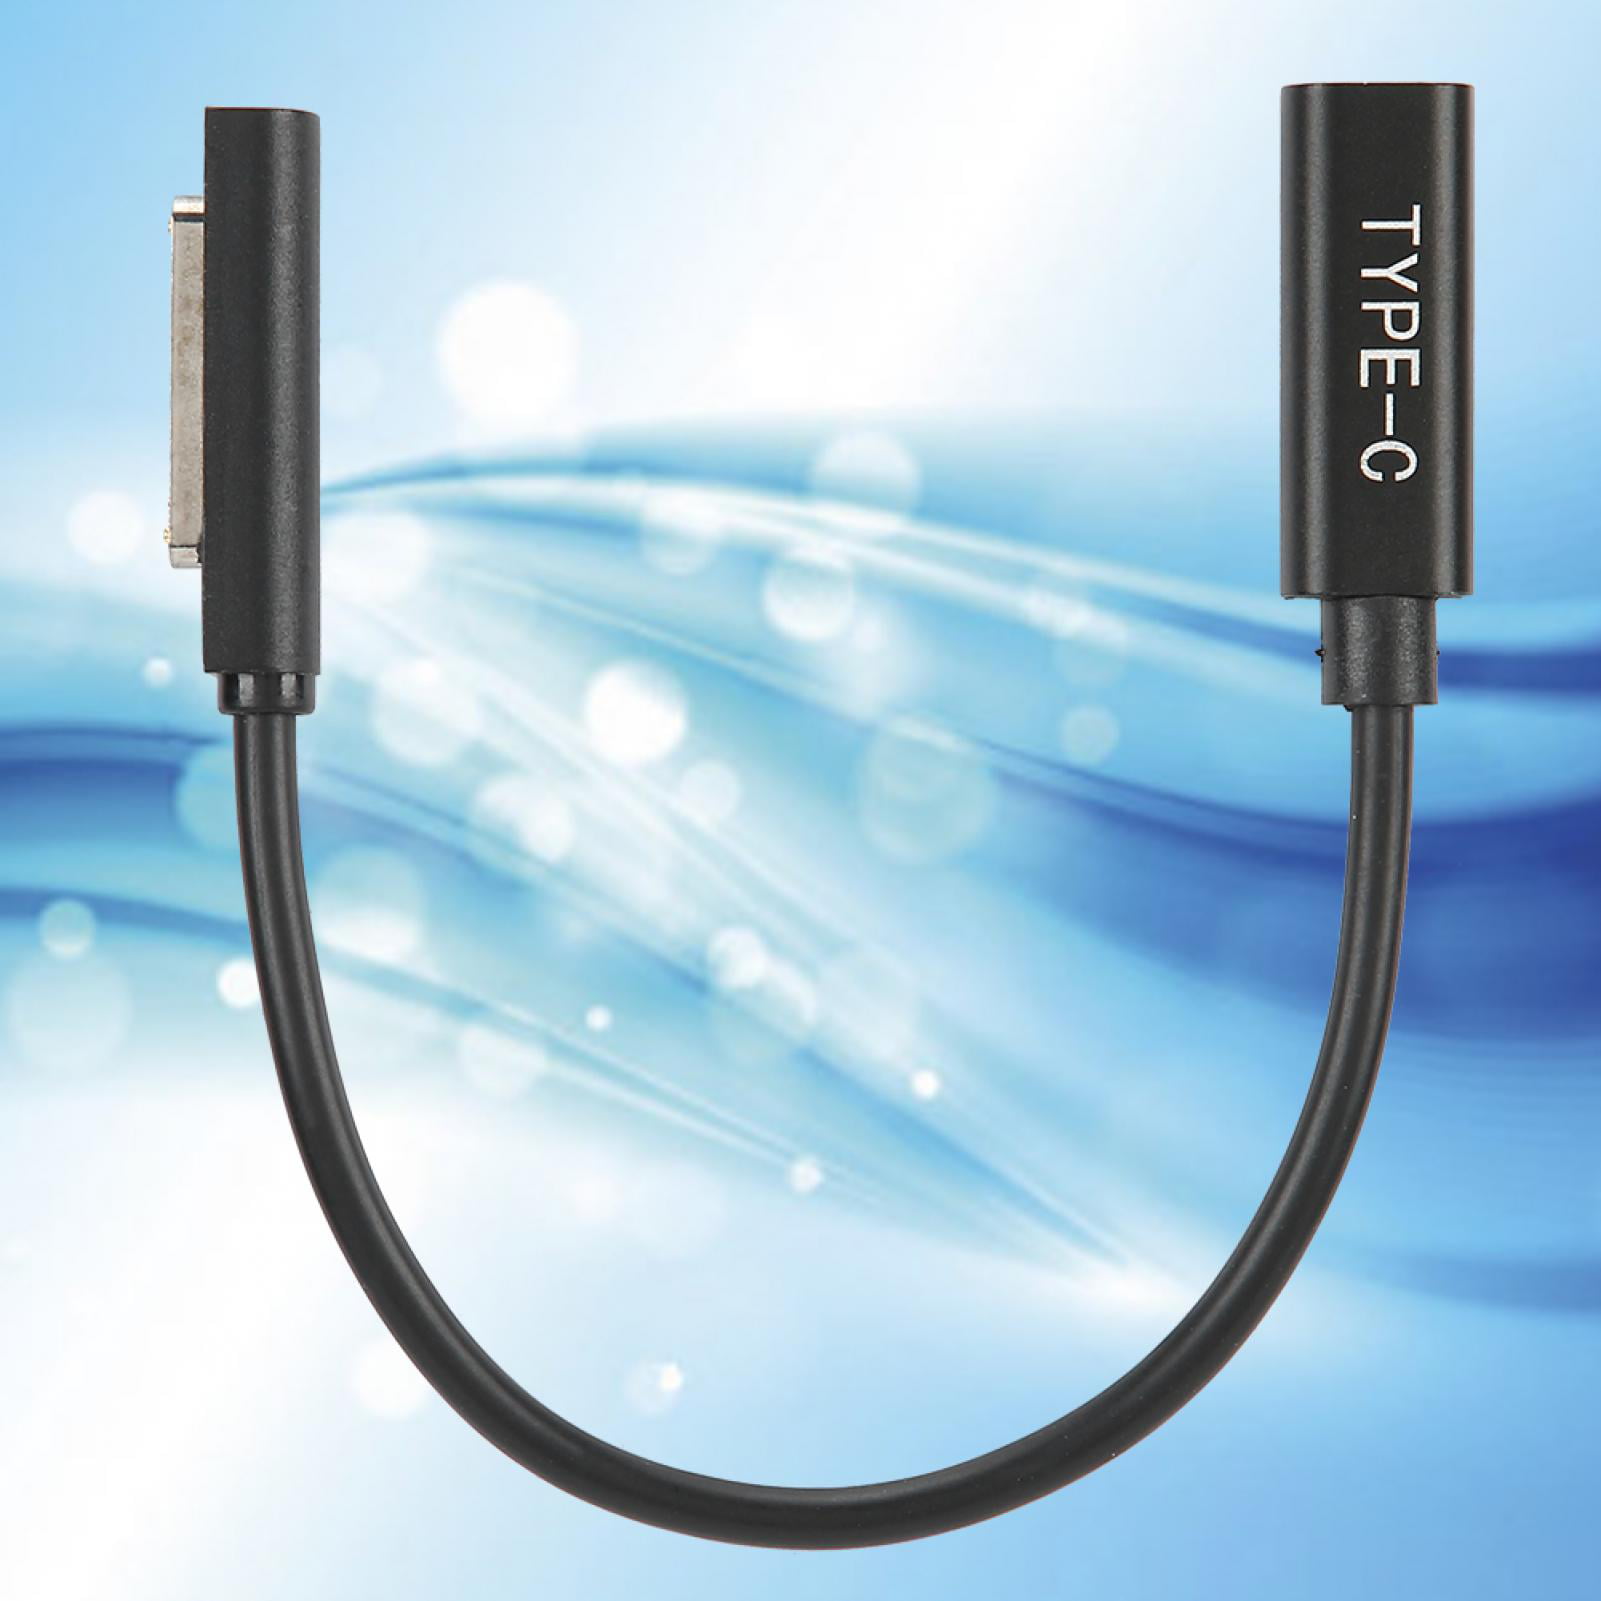 PD Type C Fast Charging Adapter Cable 12V 3A 17cm / 6.7in Length for Microsoft Surface 1/2 / Surface RT Black Adapter Cable